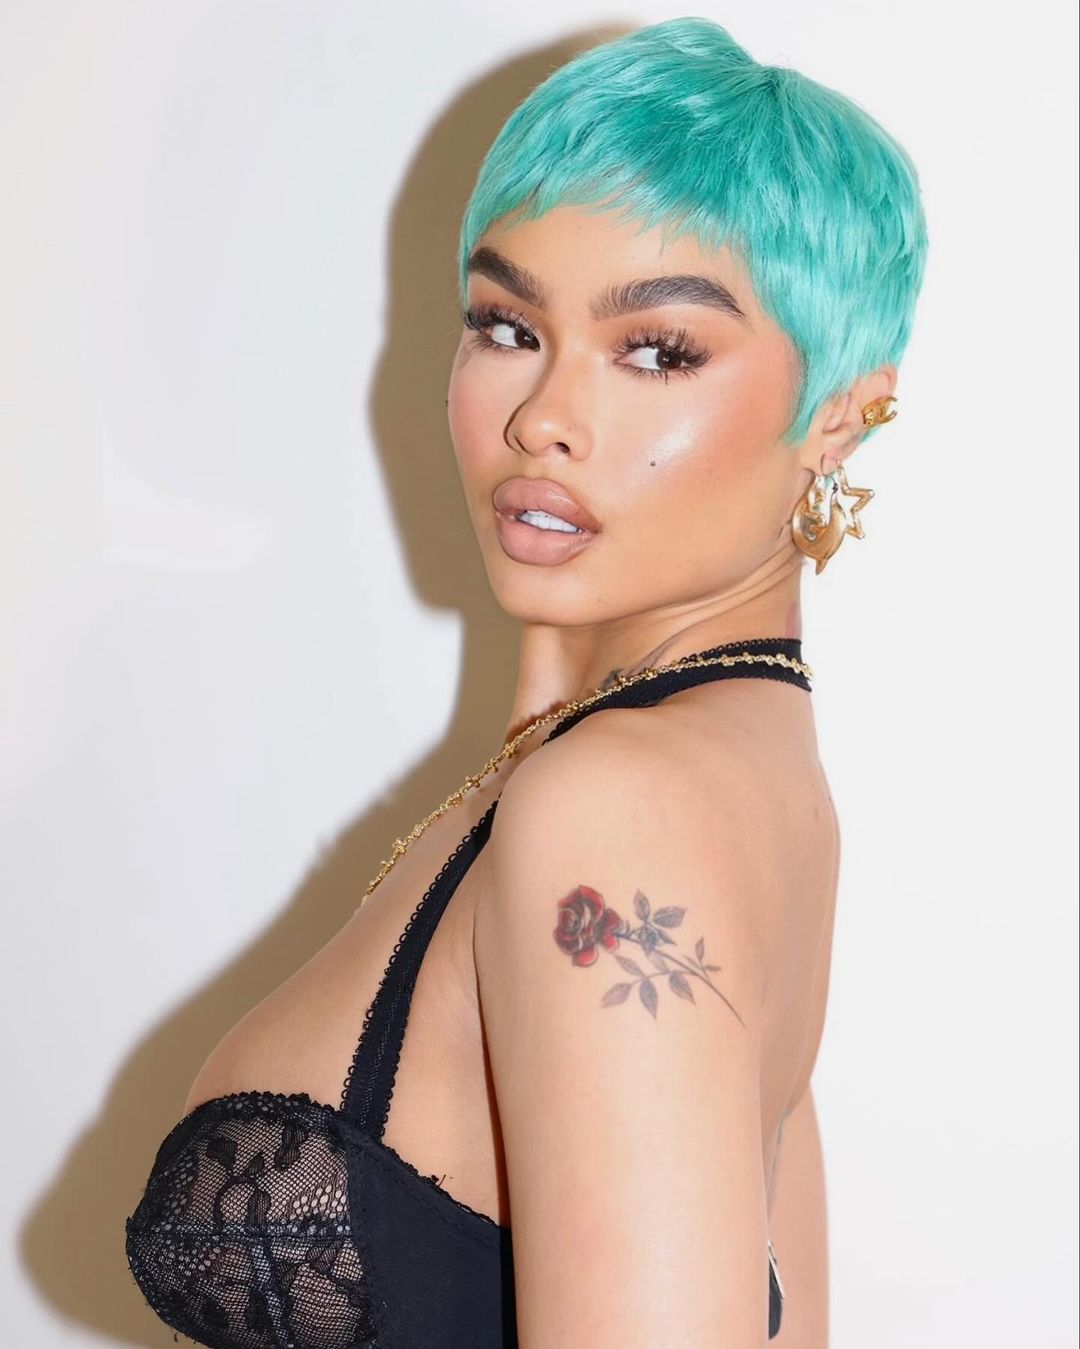 It looks like India Love is not dating now.